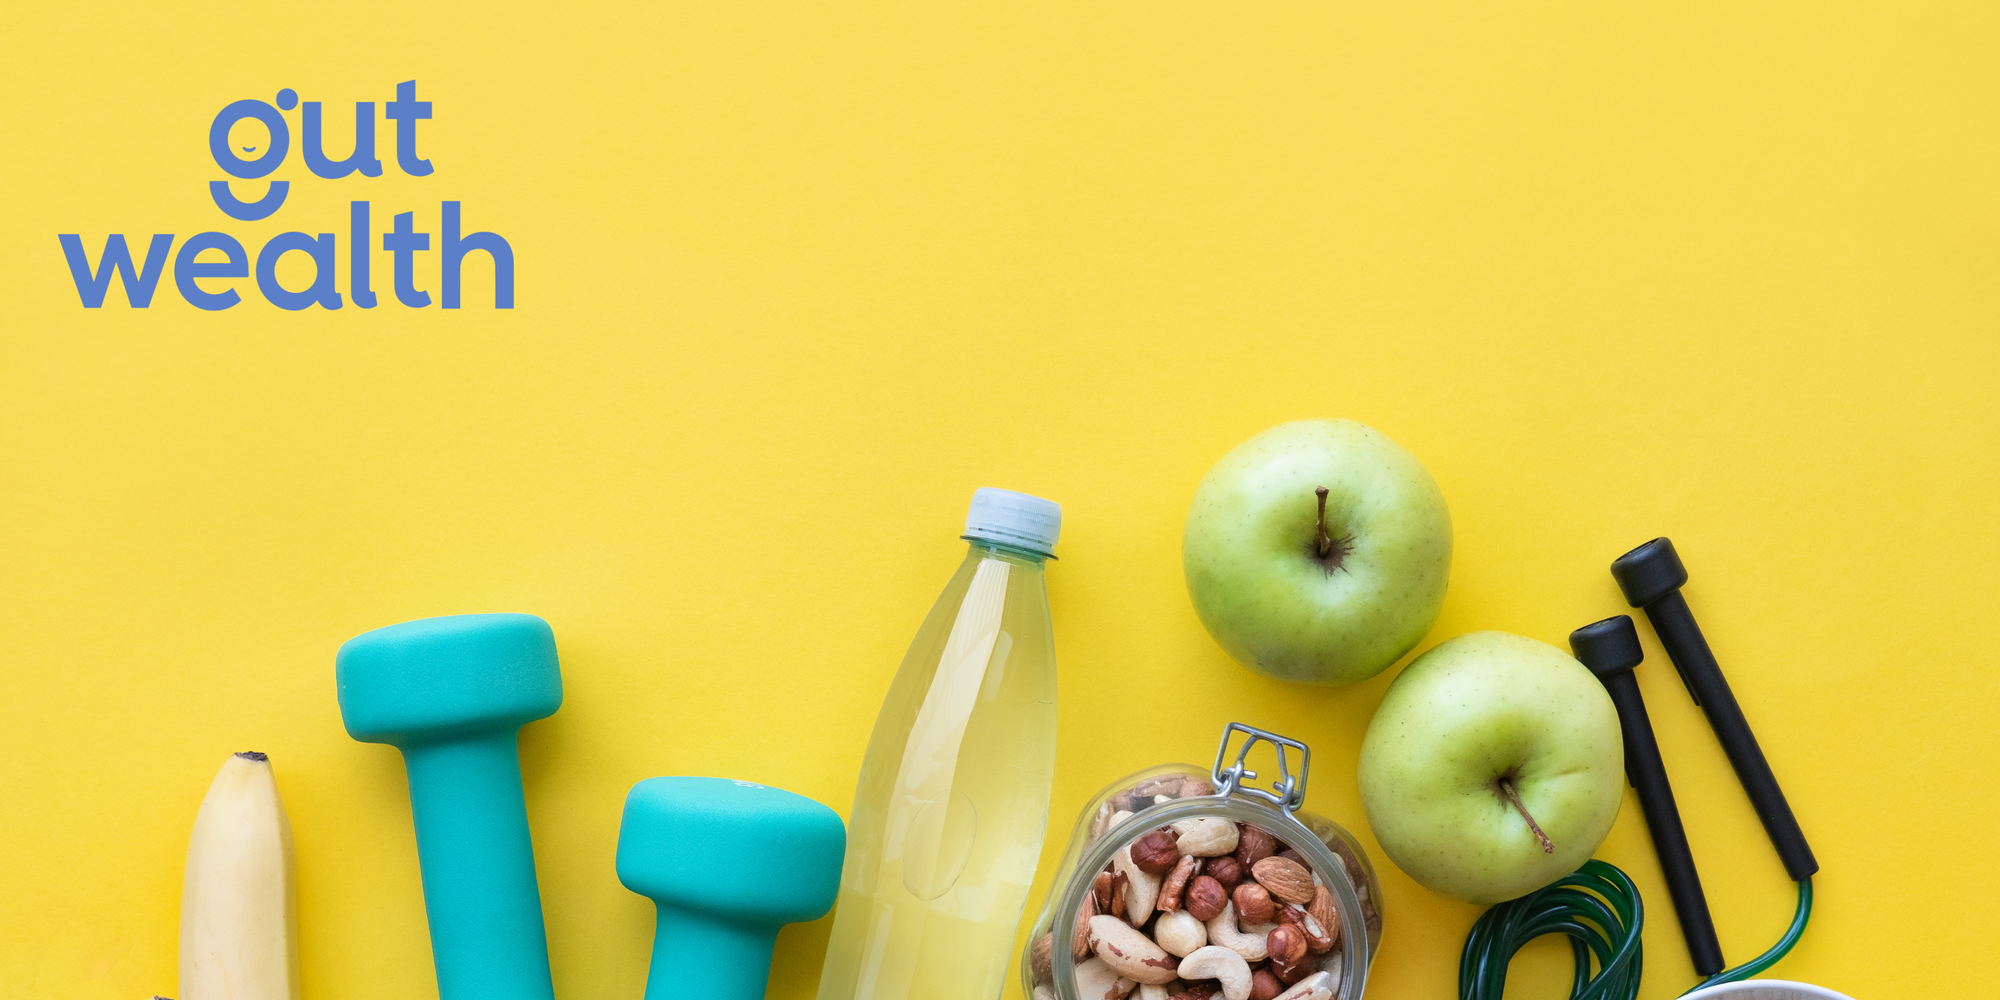 Let's Keep it Simple: The 5 Basics of Good Health